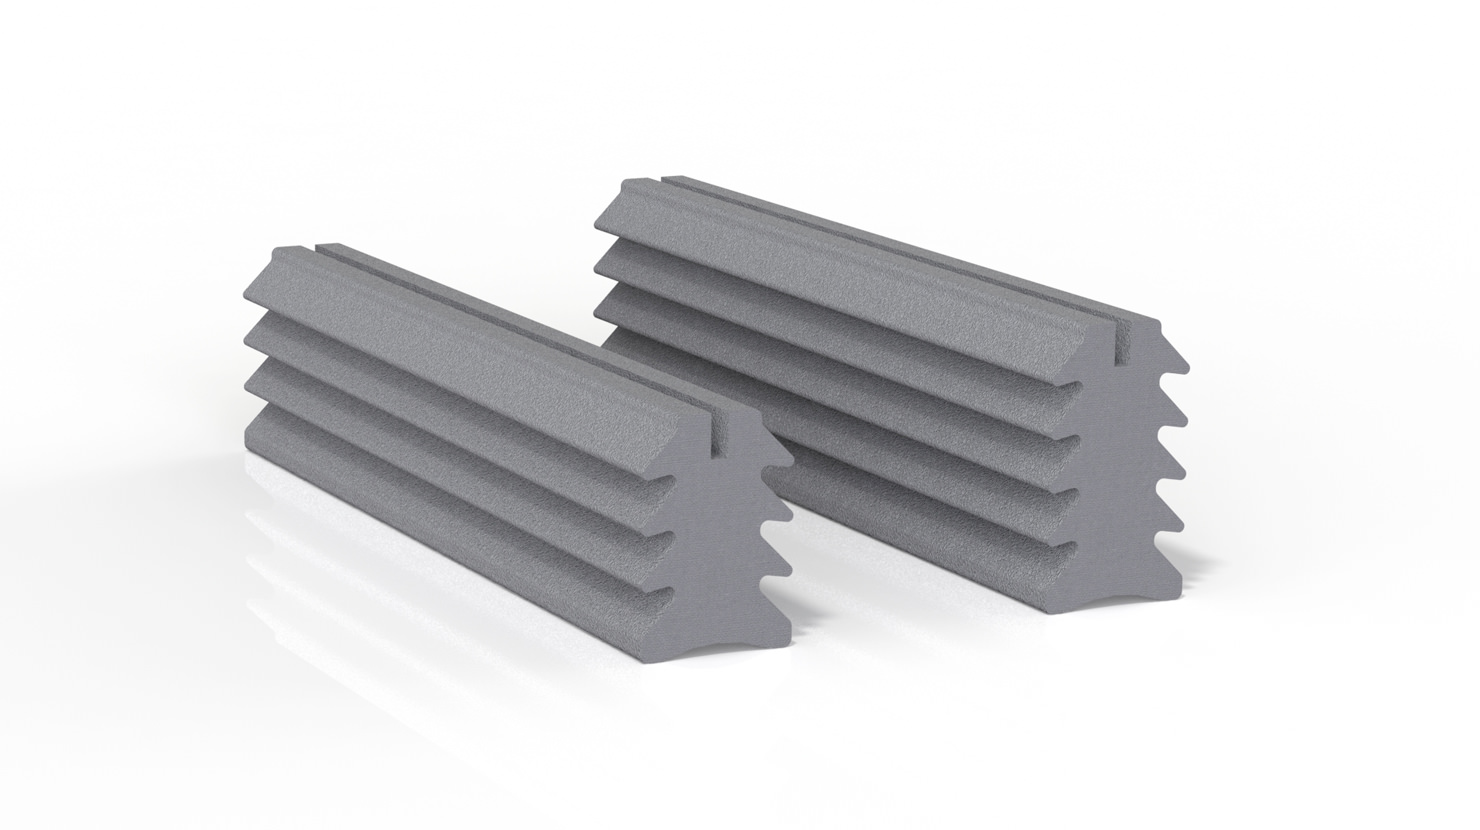 EXTRUSION DIES XPE PROFILES FOR HIGH-END INDUSTRIAL COMPONENTS